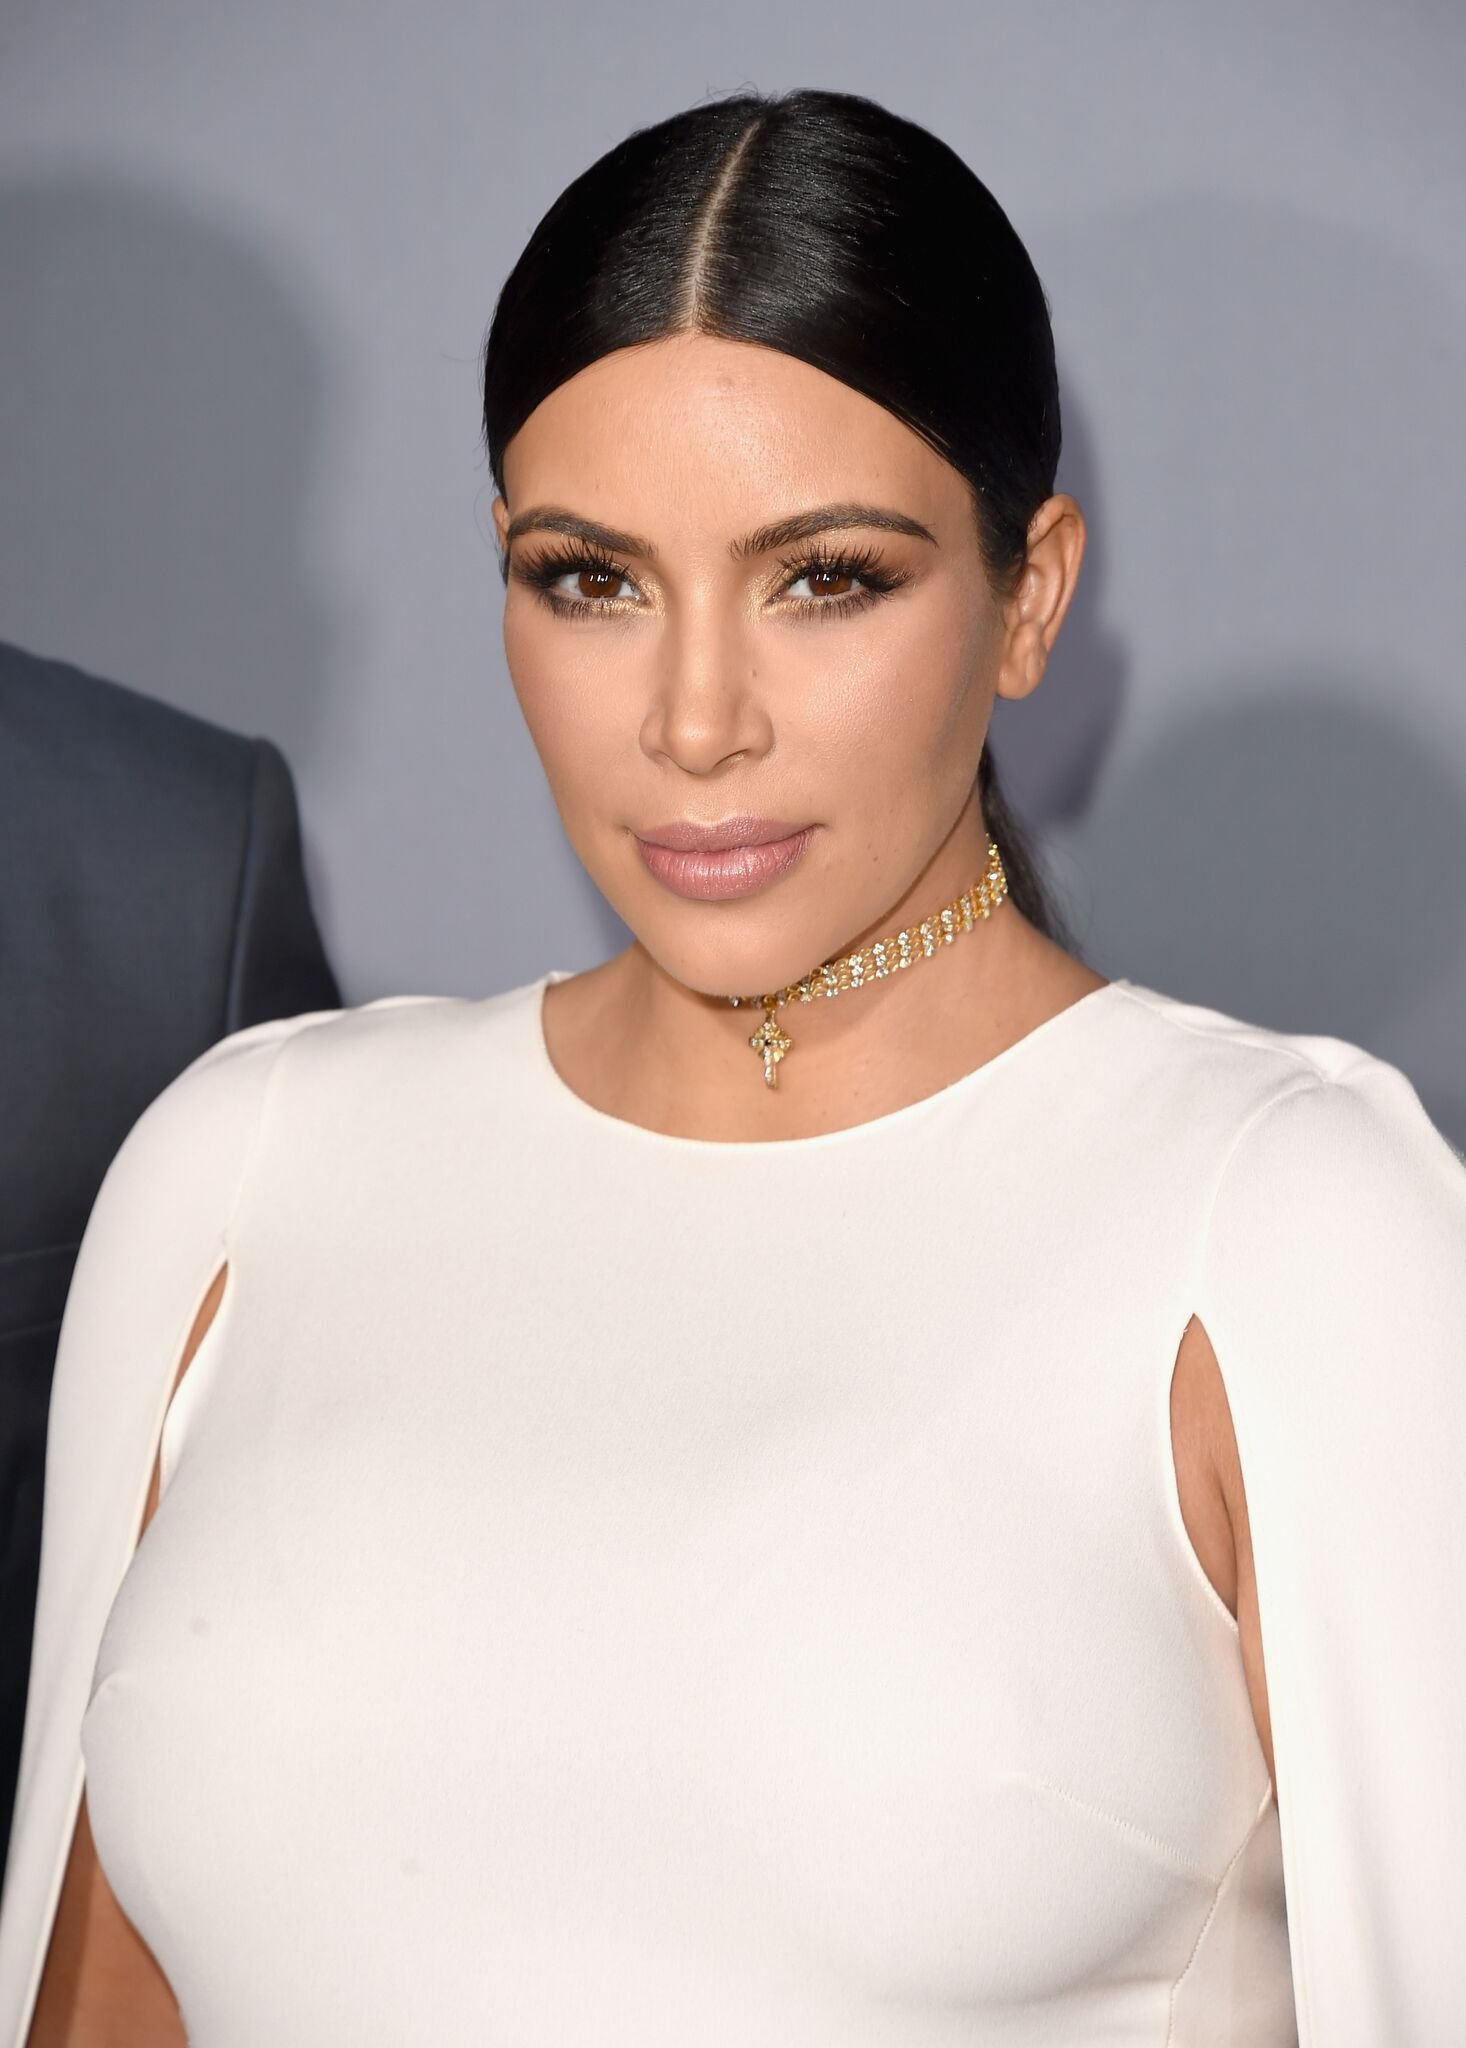 Television Personality Kim Kardashian attends the InStyle Awards at Getty Center | Getty Images